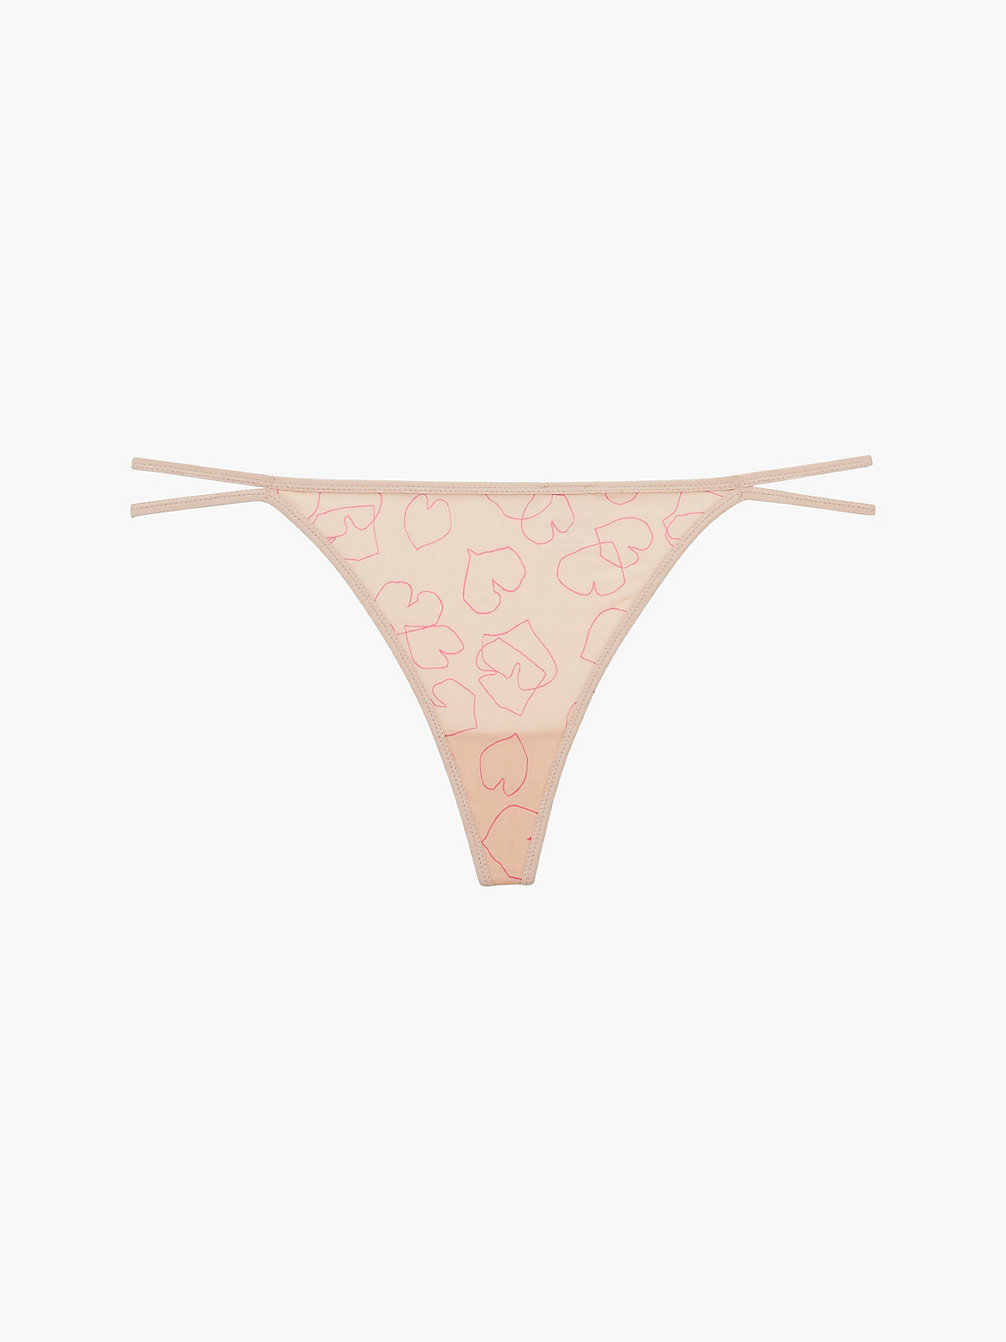 KELLY HEARTS String Thong - Sheer Marquisette undefined women Calvin Klein